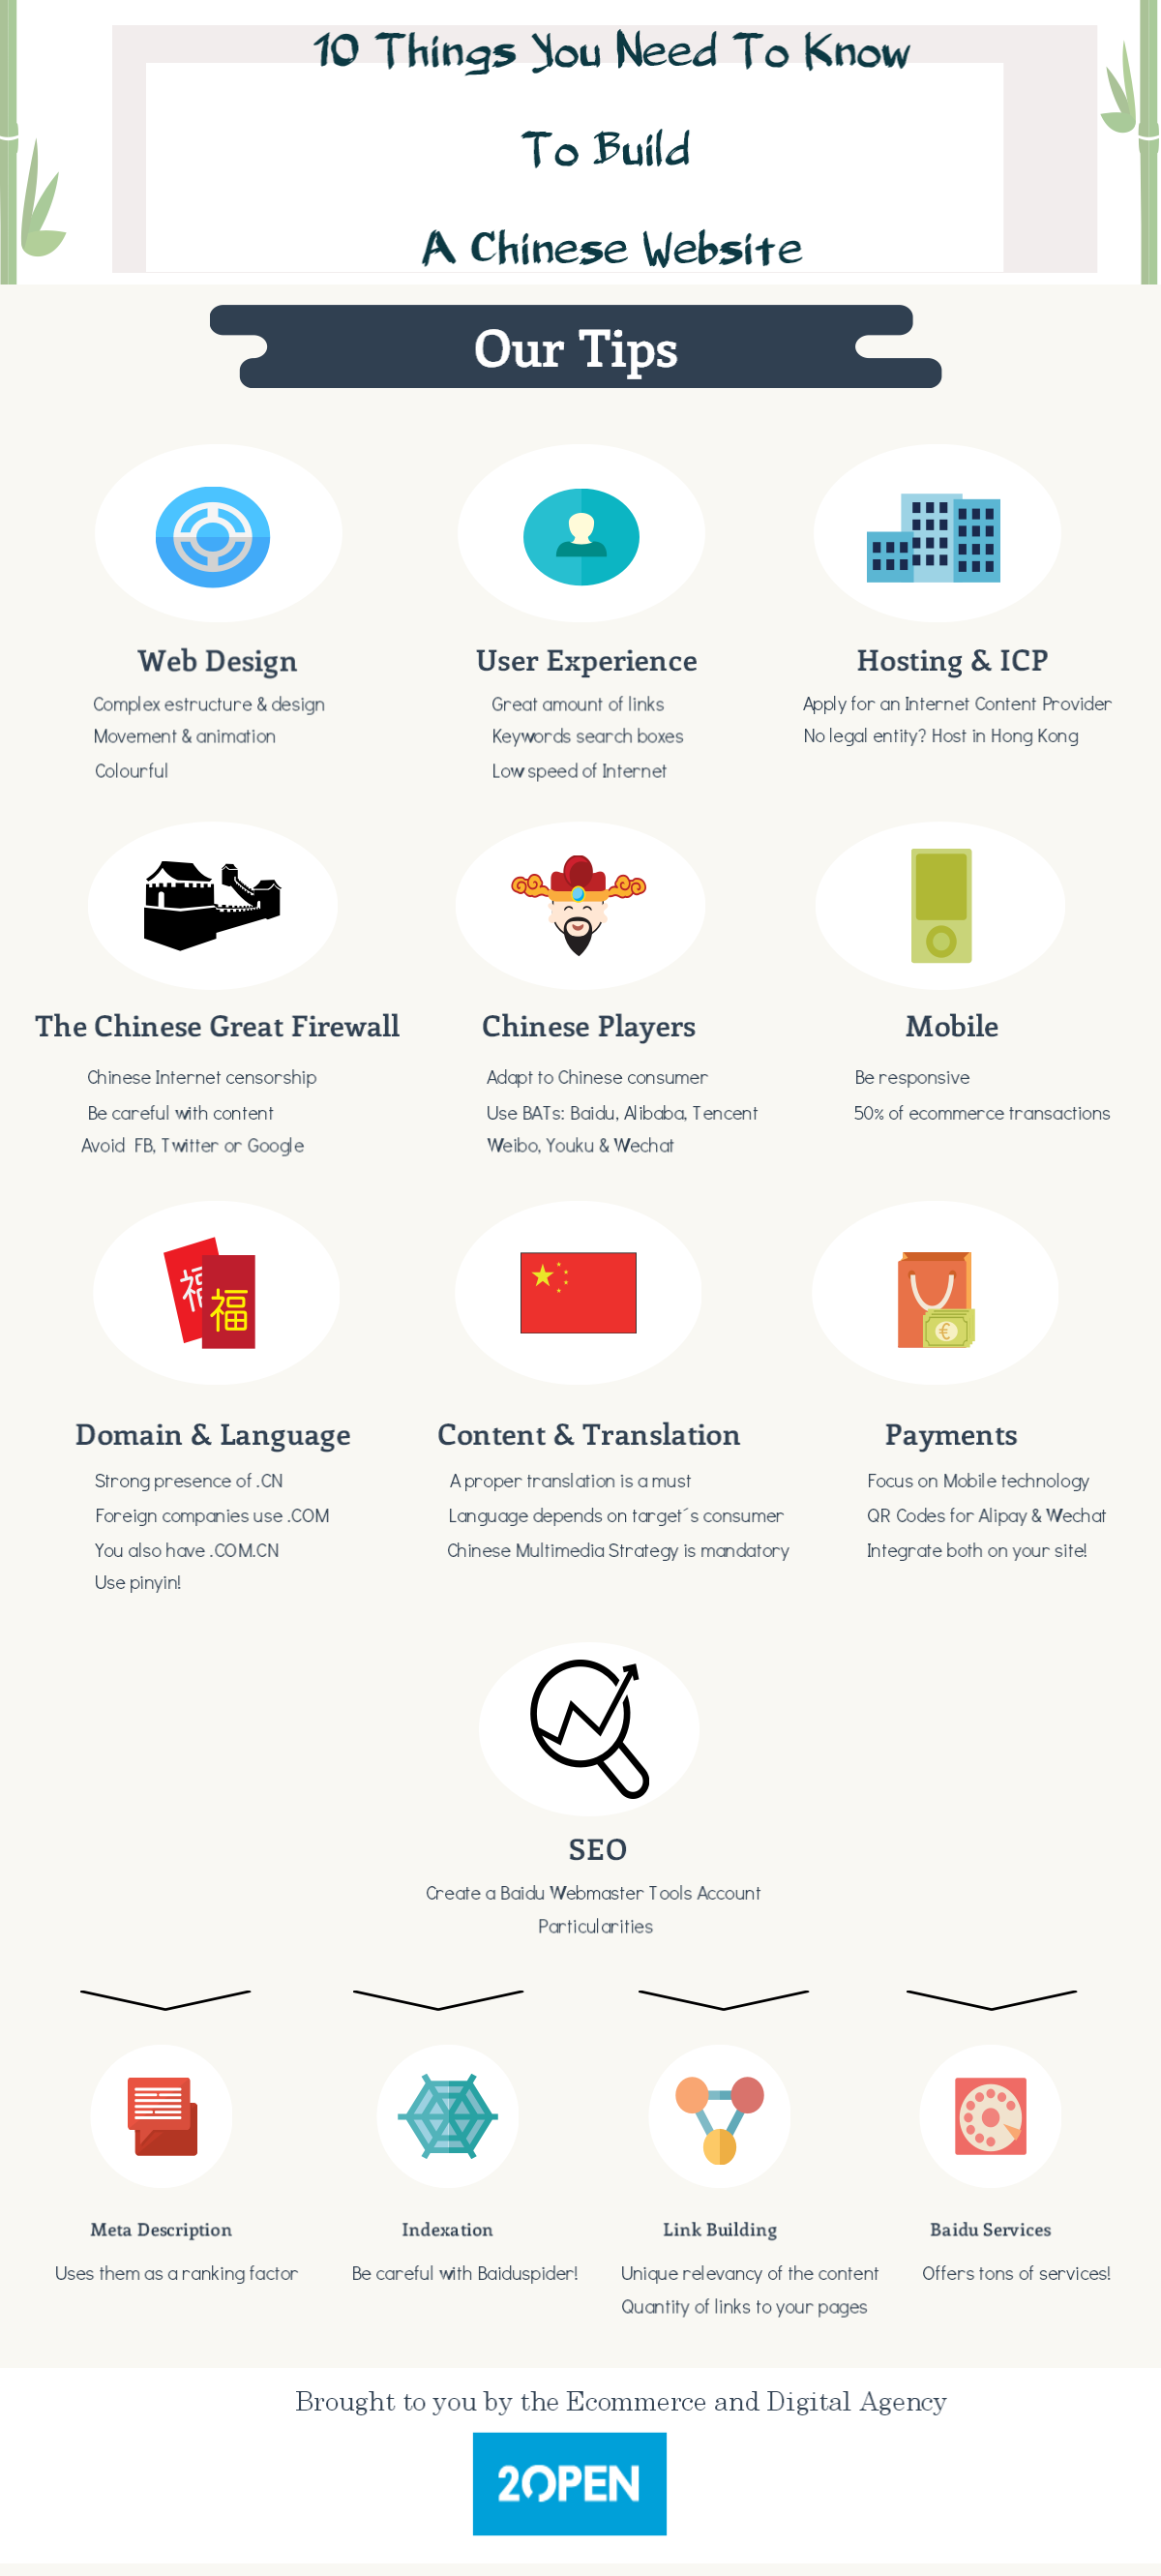 10 things you need to know to build a chinese website